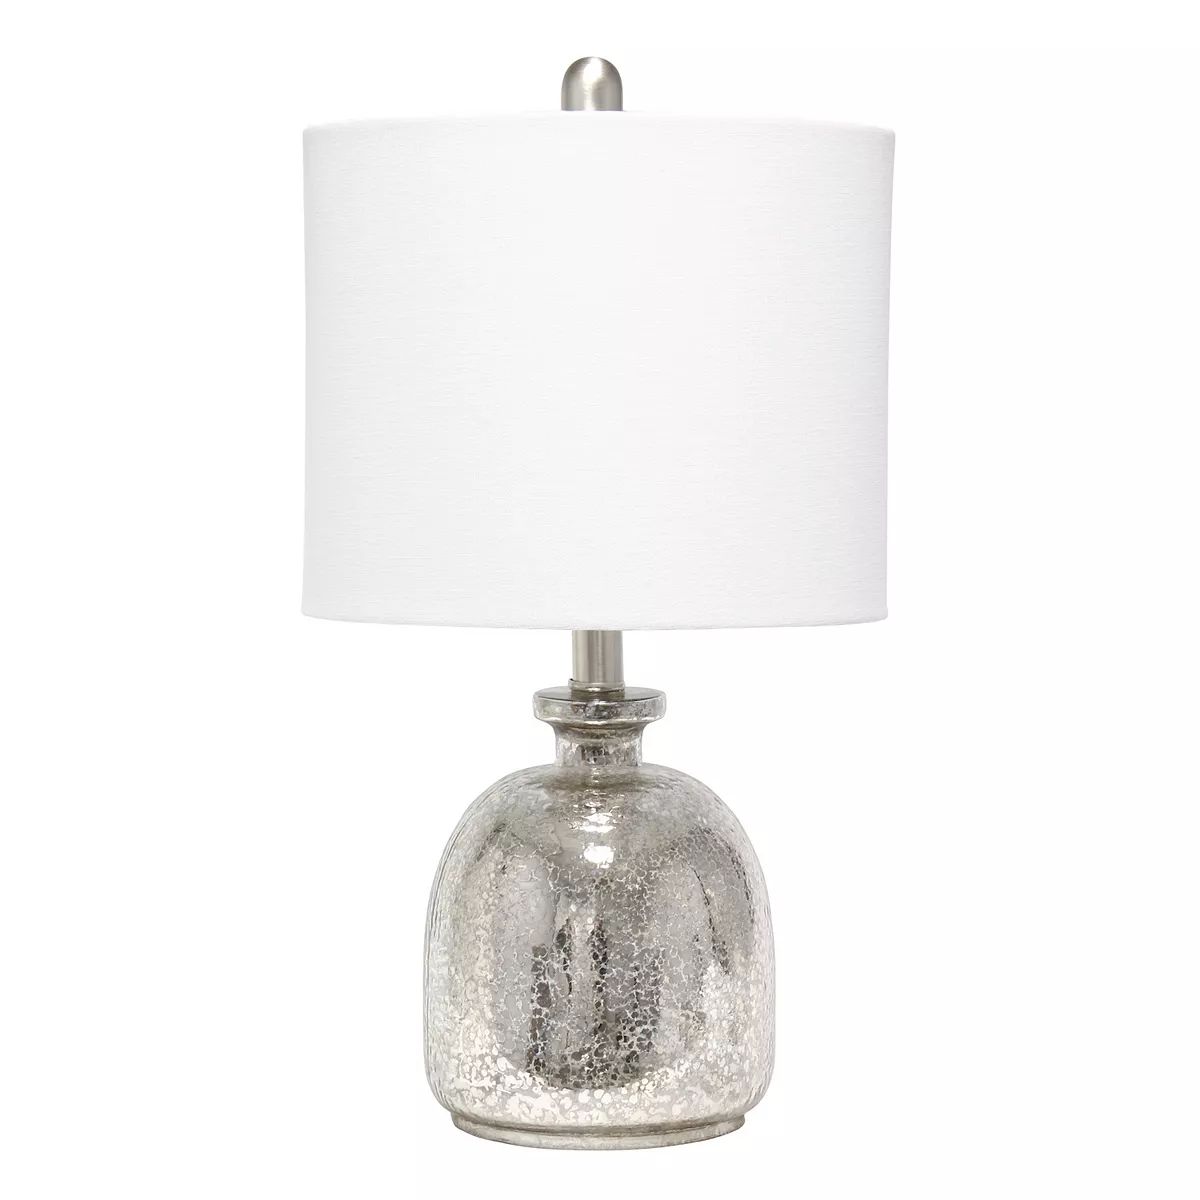 Lalia Home Hammered Glass Table Lamp | Kohl's